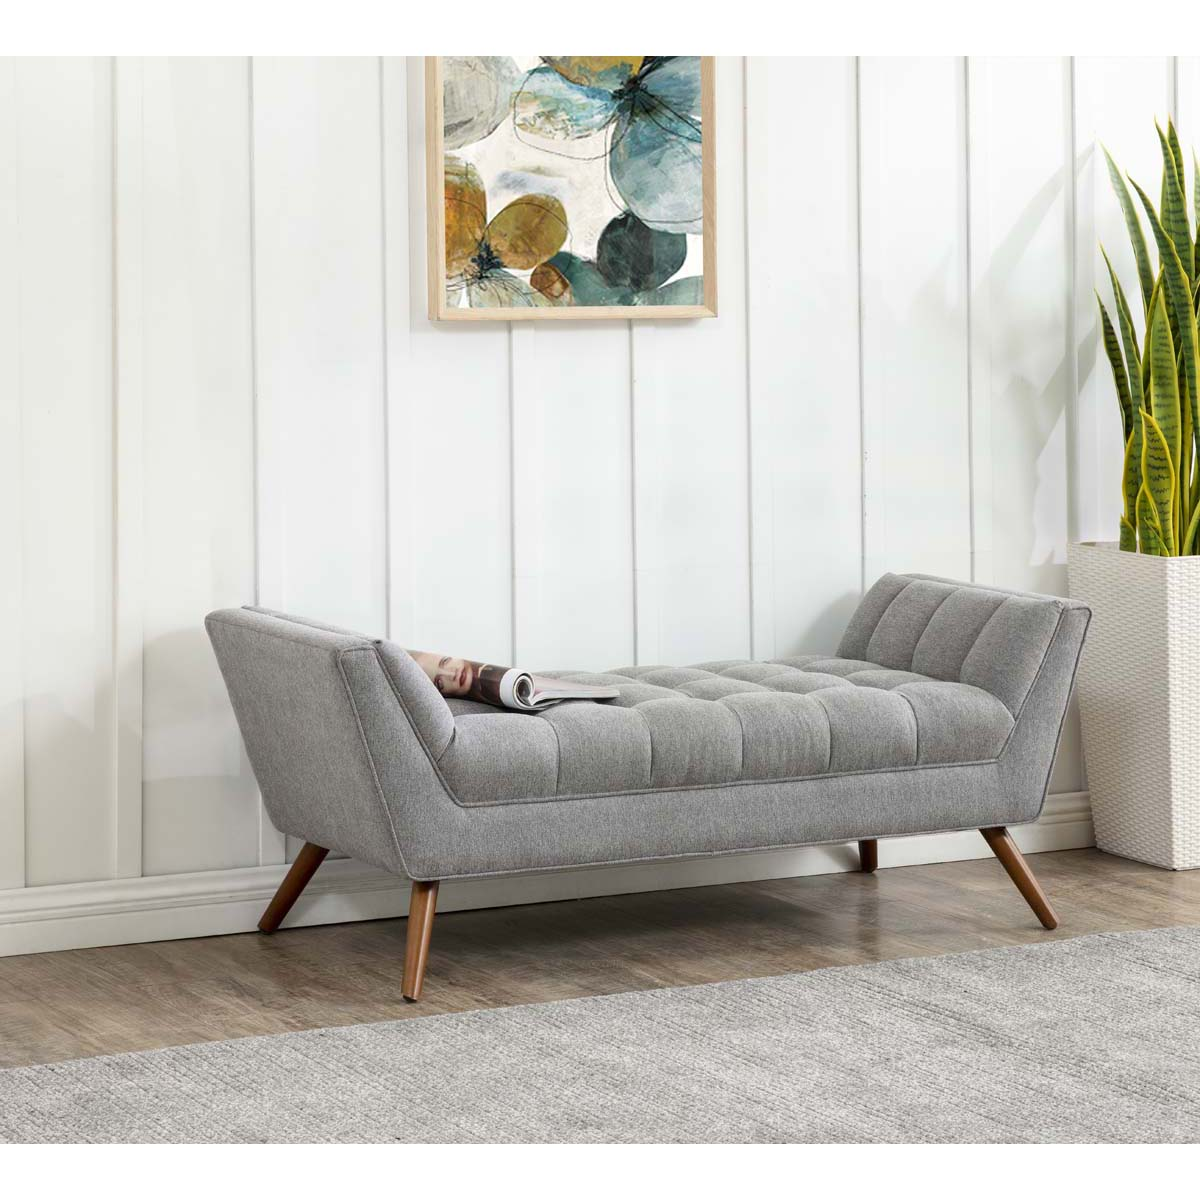 Safavieh Couture Damian Tufted Bench - Light Grey